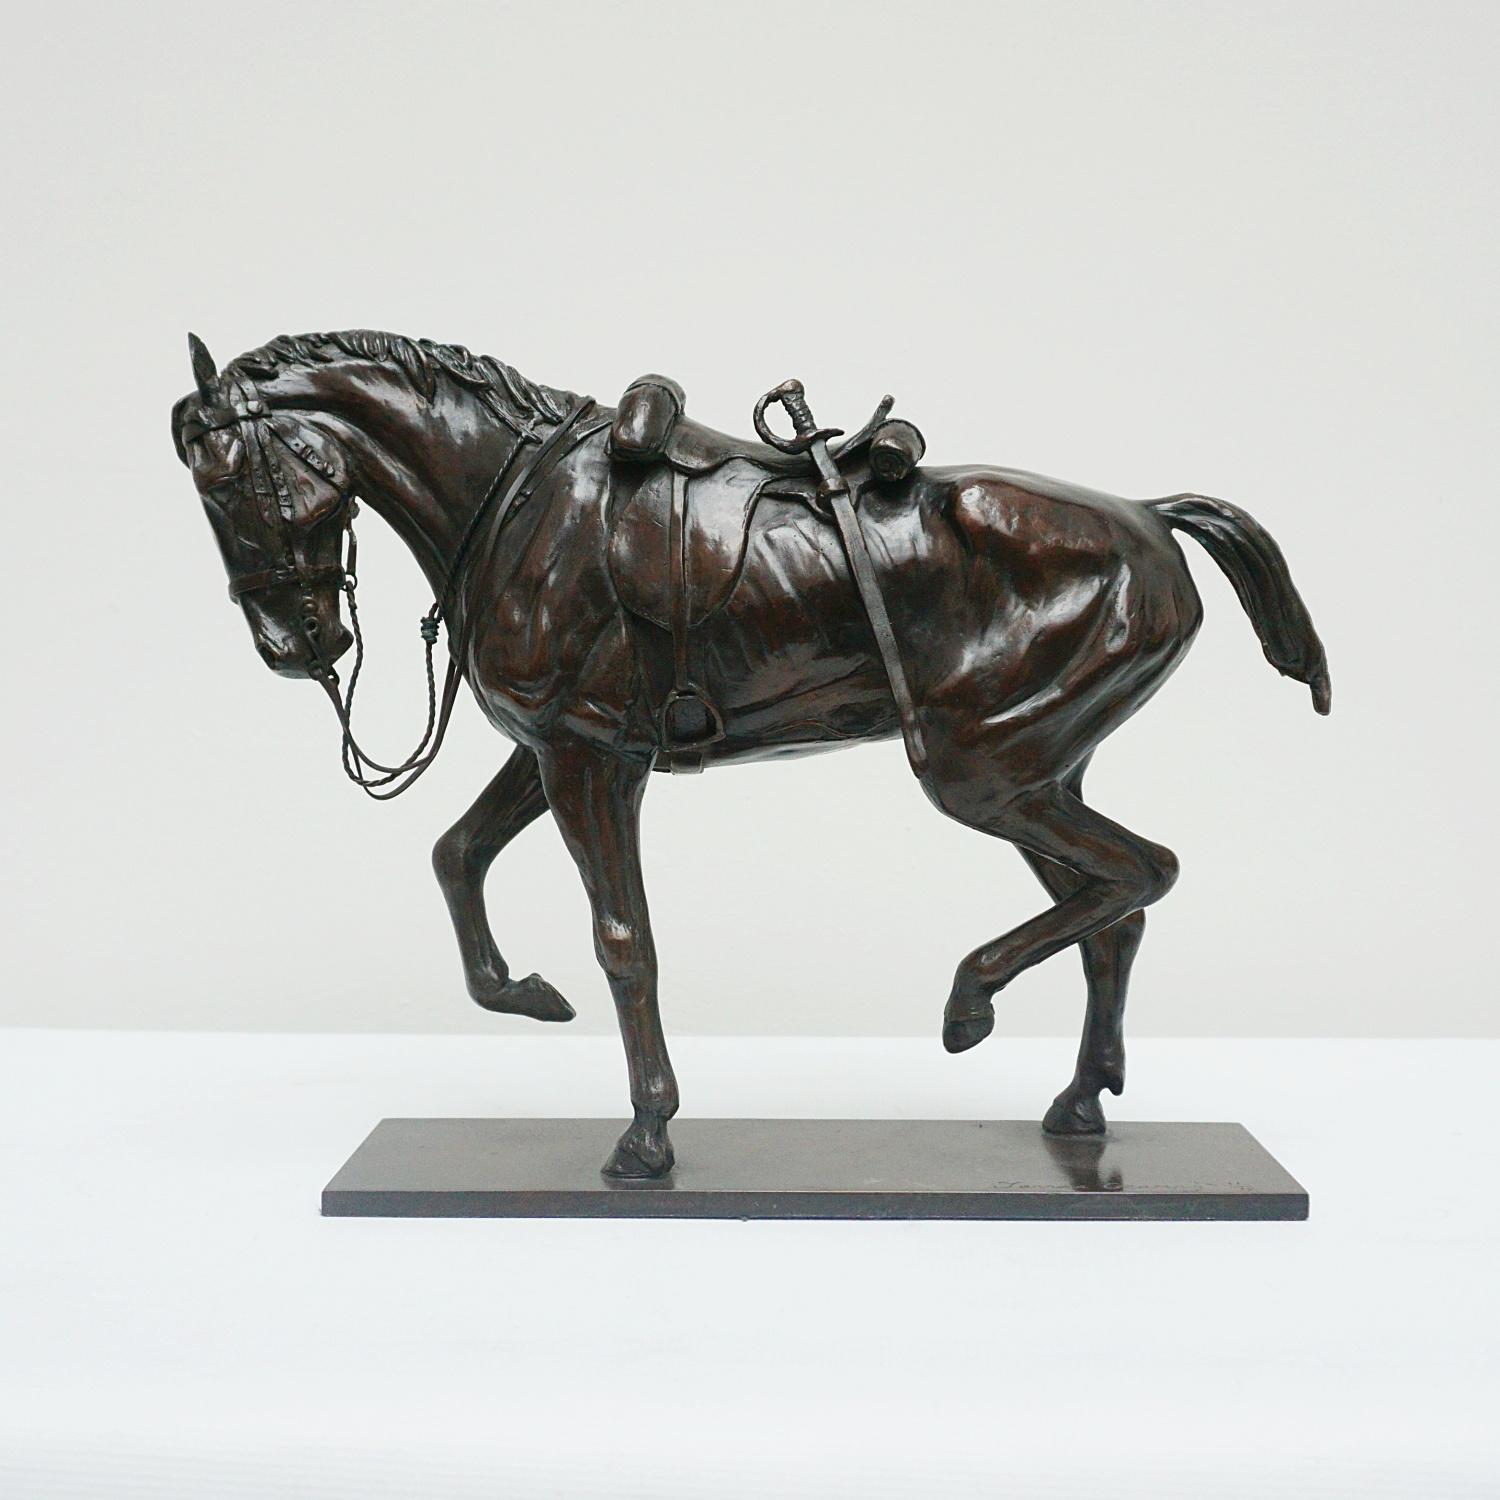 A contemporary solid bronze sculpture of a War horse in movement by Contemporary artist Jenna Gearing. Rich dark brown patination and fine hand finished detail. Limited edition of 12. Signed Jenna Gearing 11/12 to base. 

Jenna Gearing is a